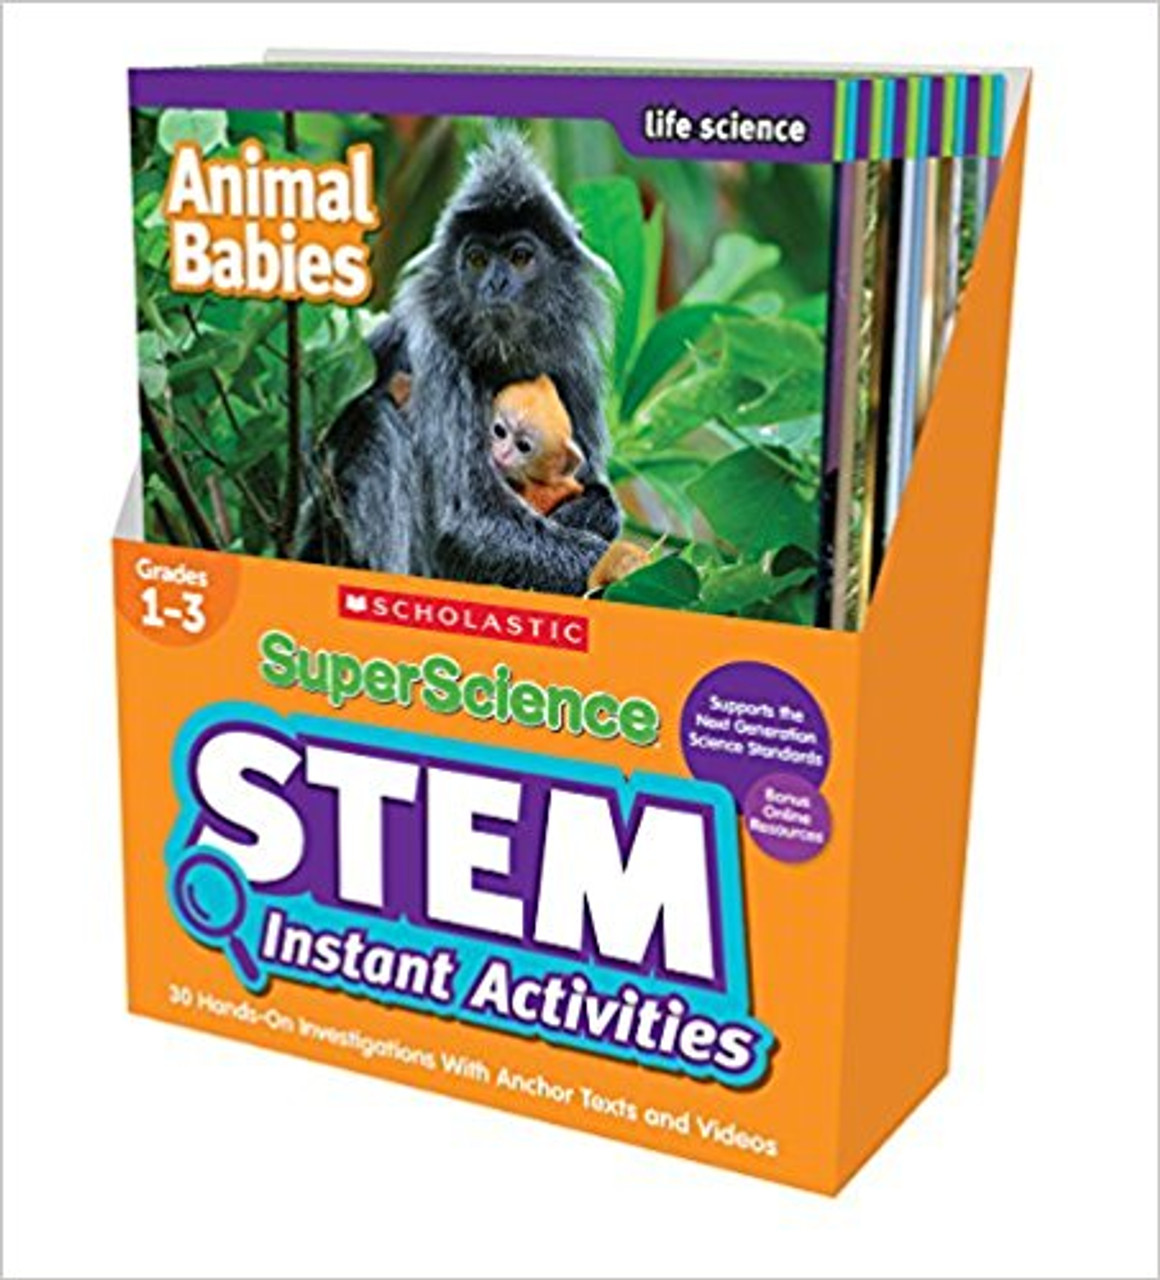 Super Science STEM Instant Activities: Grades 1-3: 30 Hands-On Investigations with Anchor Texts and Videos by Katherine Burkett